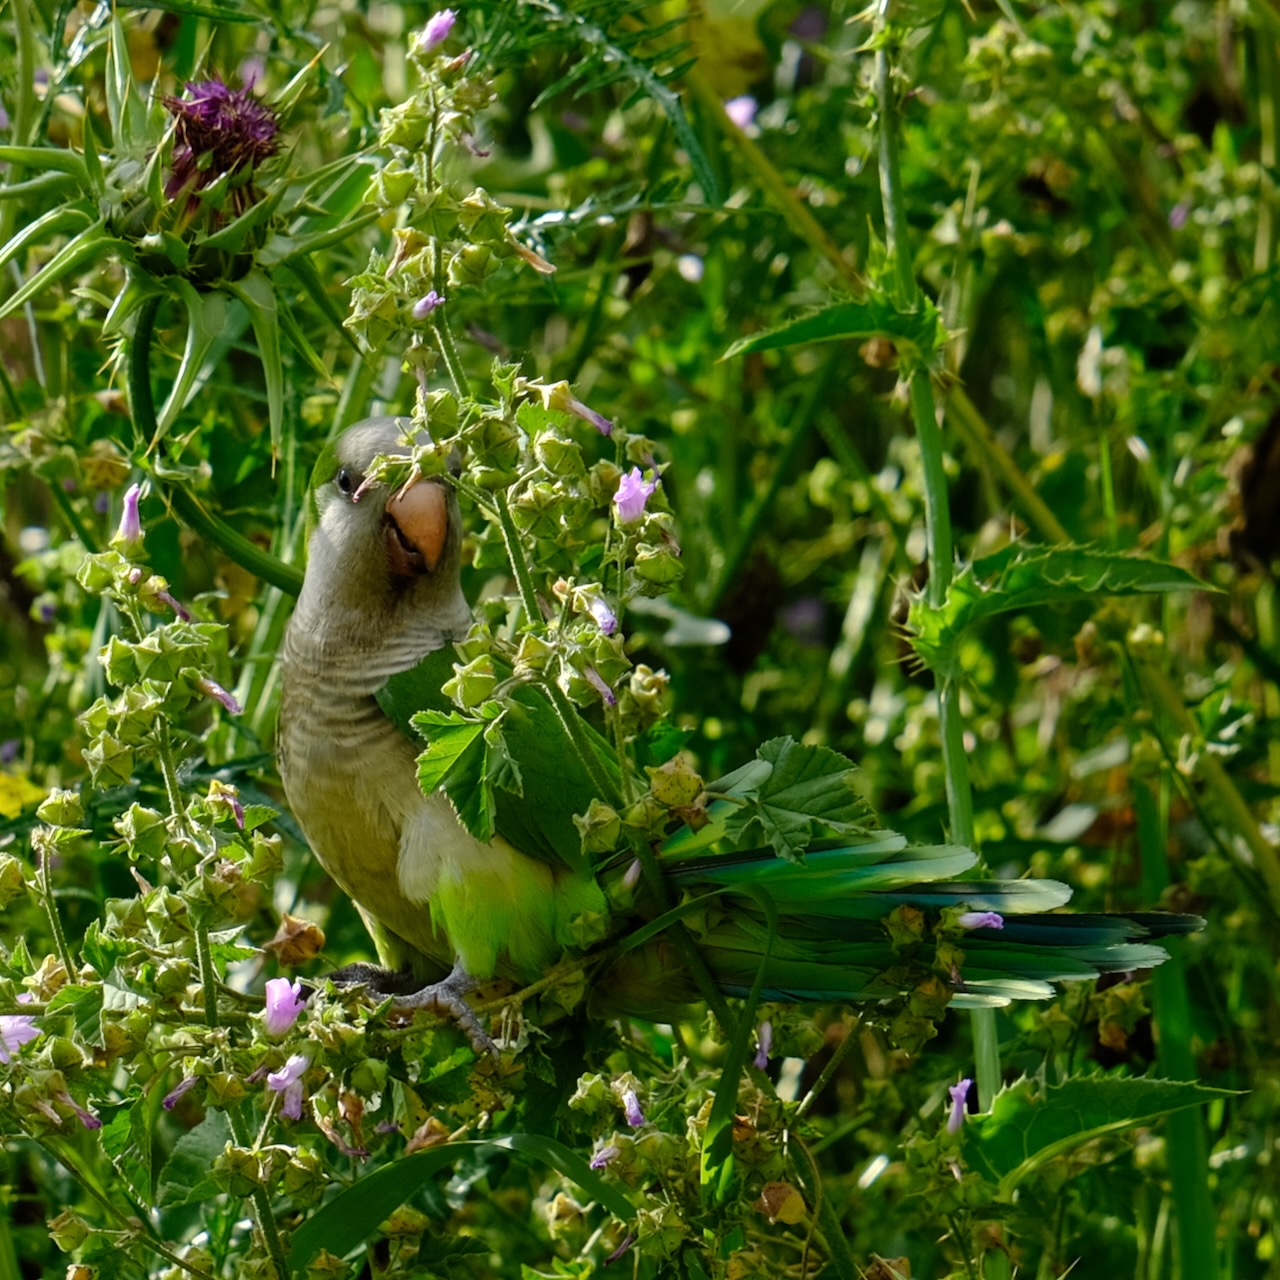 A parakeet sits half-hidden behind a thistle stalk, cheekily looking straight at the camera. Its wings and tail feathers are dark green, but the fluffy feathers around its legs are brighter. The overall effect makes it seem like it's half in shadow and half in sunlight, even through it isn't.